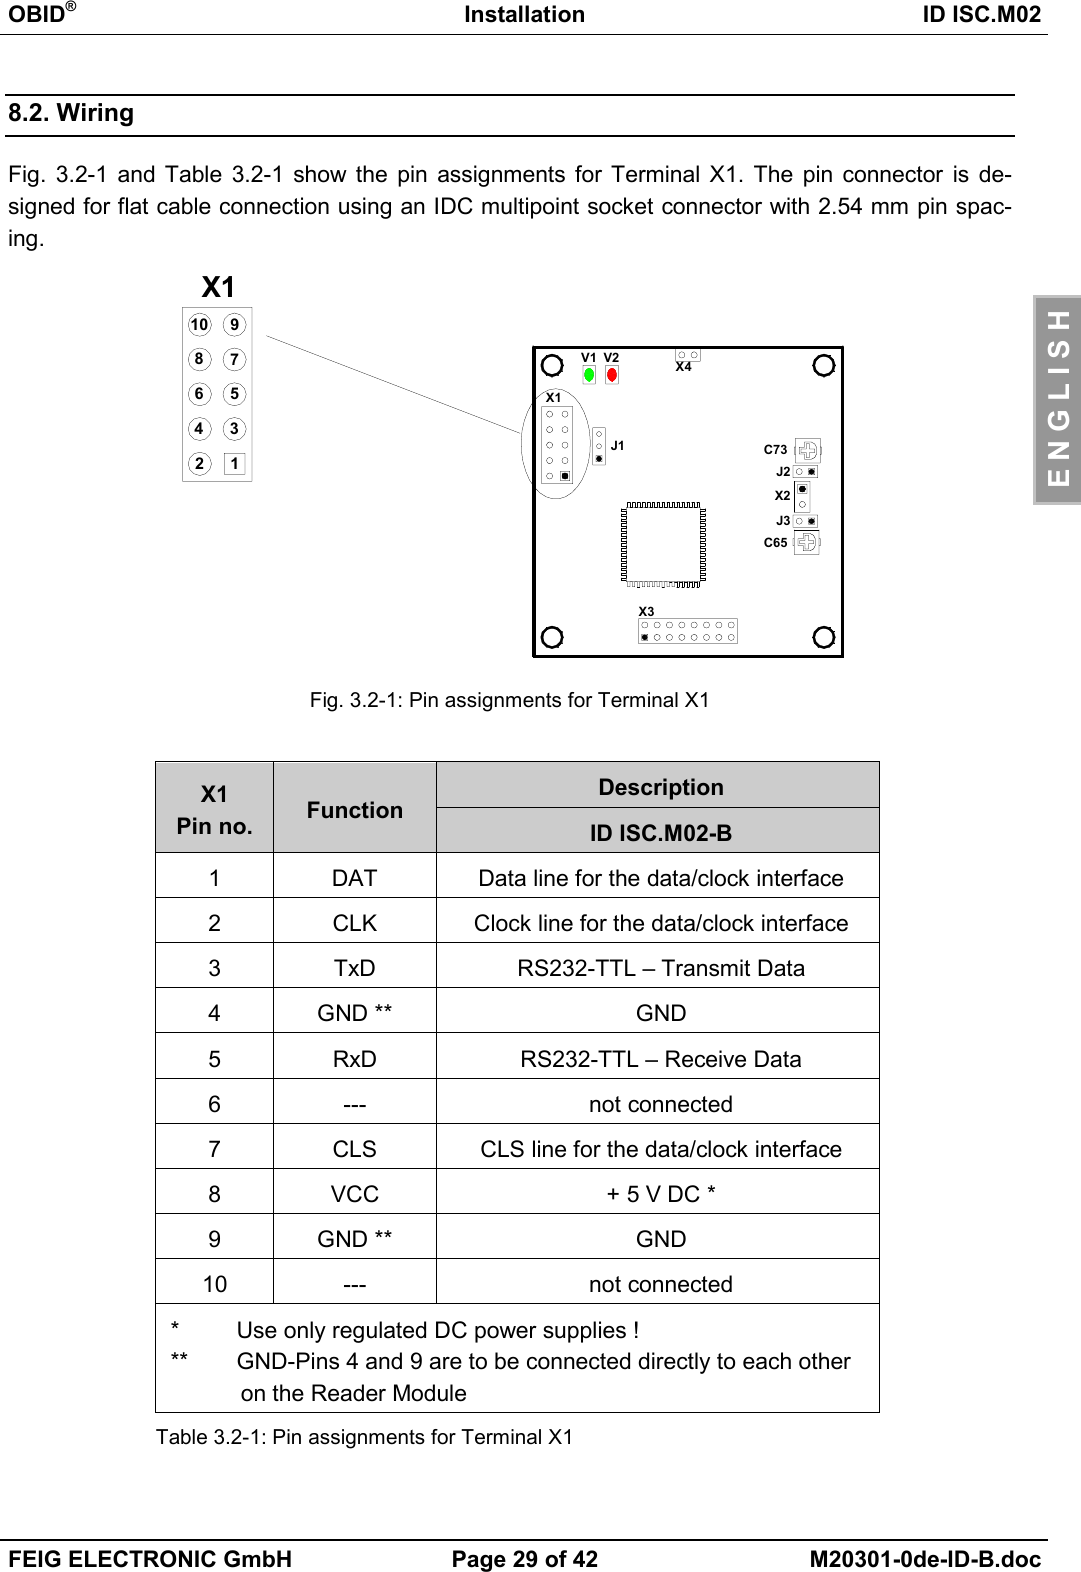 OBID®Installation ID ISC.M02FEIG ELECTRONIC GmbH Page 29 of 42 M20301-0de-ID-B.docE N G L I S H8.2. WiringFig. 3.2-1 and Table 3.2-1 show the pin assignments for Terminal X1. The pin connector is de-signed for flat cable connection using an IDC multipoint socket connector with 2.54 mm pin spac-ing.Fig. 3.2-1: Pin assignments for Terminal X1DescriptionX1Pin no. Function ID ISC.M02-B1 DAT Data line for the data/clock interface2 CLK Clock line for the data/clock interface3 TxD RS232-TTL – Transmit Data4 GND ** GND5 RxD RS232-TTL – Receive Data6 --- not connected7 CLS CLS line for the data/clock interface8 VCC + 5 V DC *9 GND ** GND10 --- not connected*  Use only regulated DC power supplies !**  GND-Pins 4 and 9 are to be connected directly to each other           on the Reader ModuleTable 3.2-1: Pin assignments for Terminal X1X1J1V2V1C65X112435796810J2J3X2X3X4C73